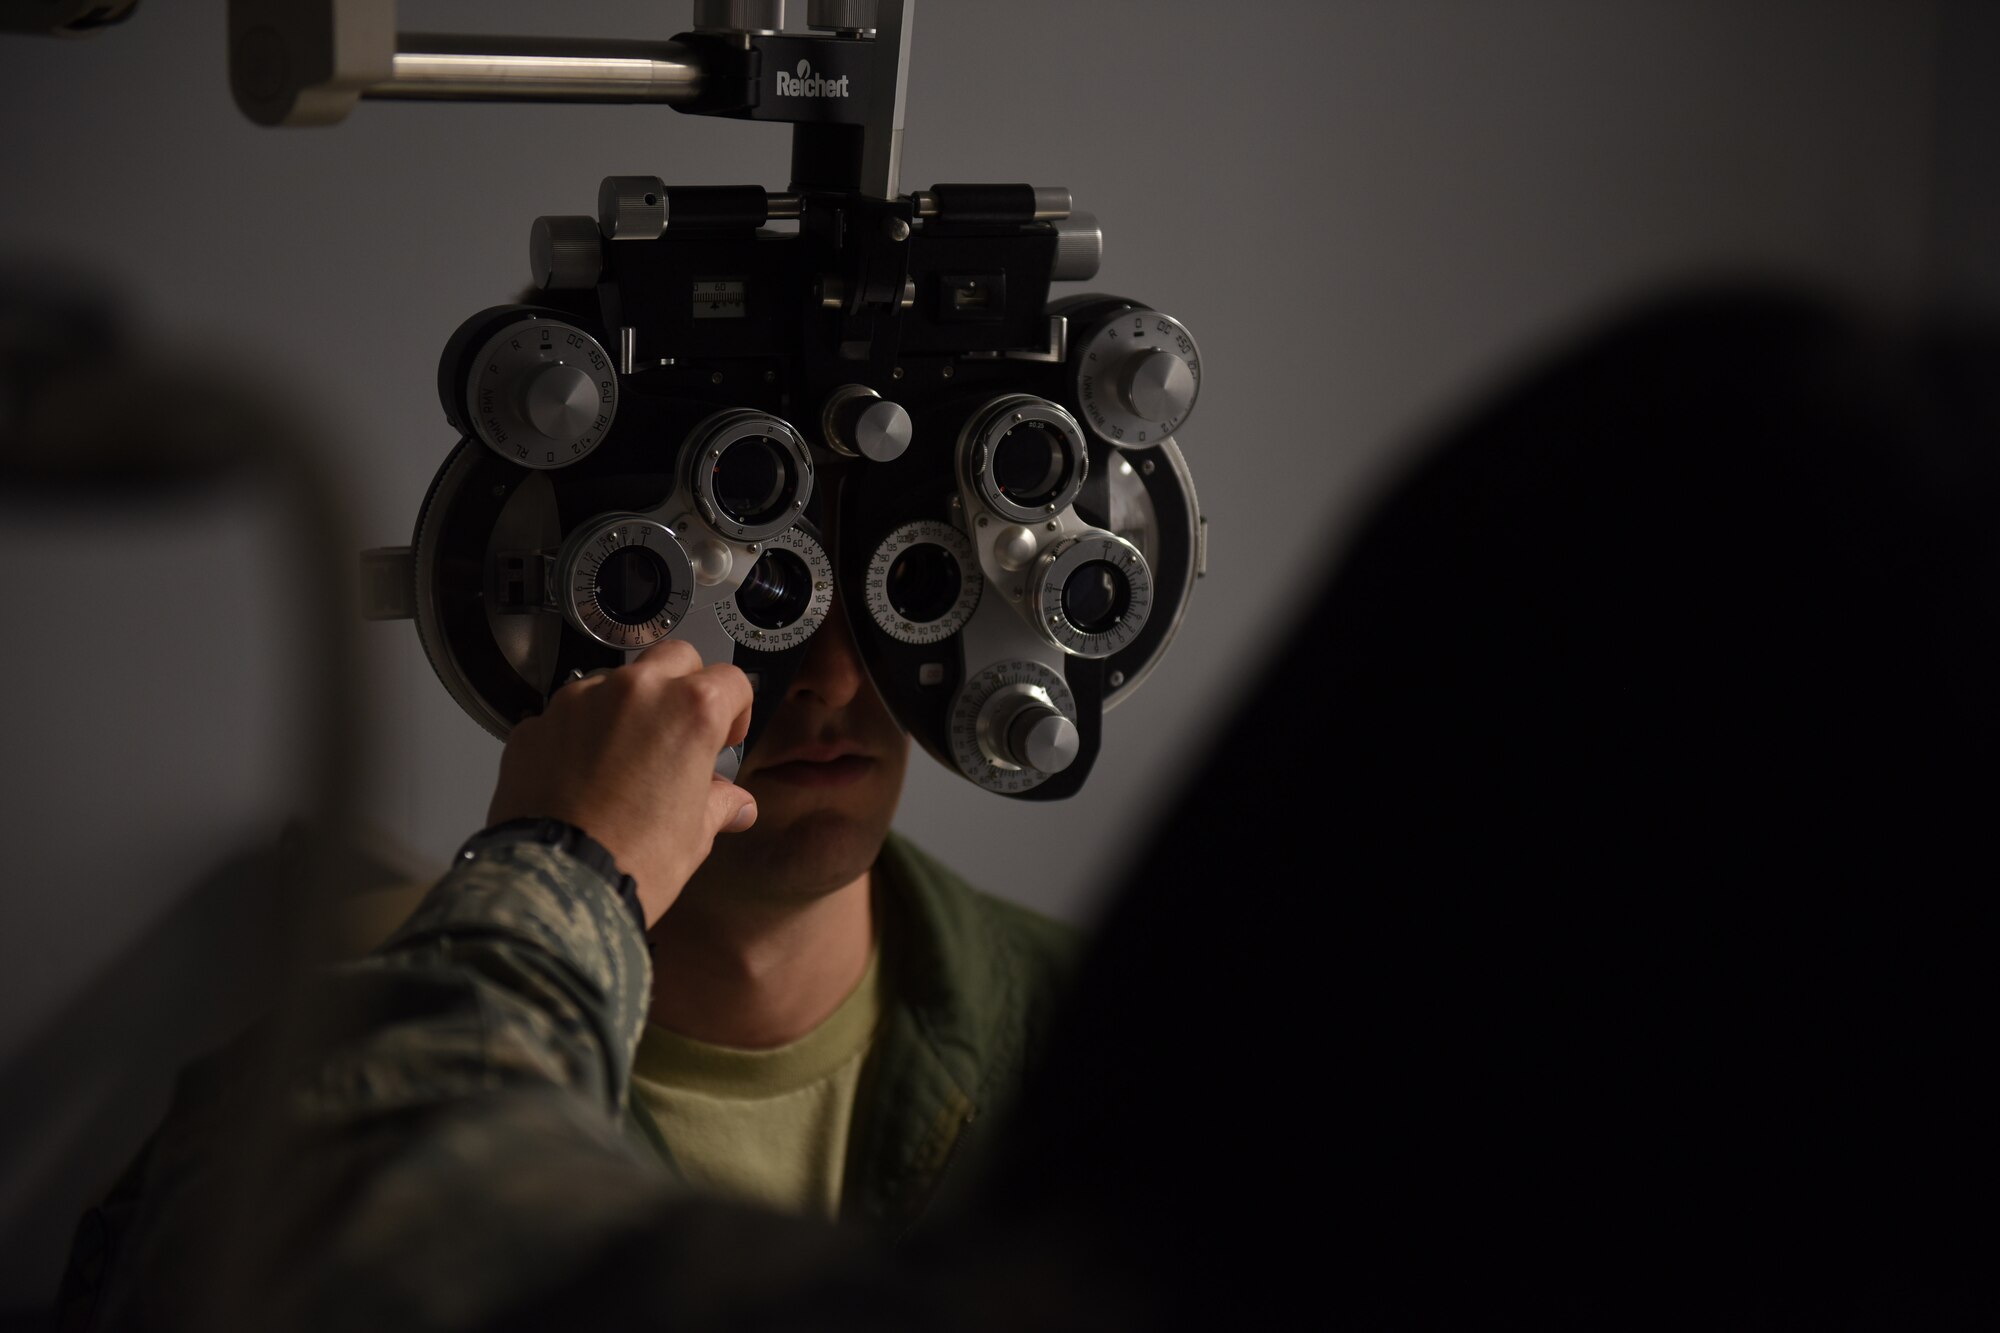 Capt. Amy Brown (right), 193rd Special Operations Wing Medical Group optometrist, conducts an eye exam on a patient during a recent unit training assembly at the wing's Middletown, Pennsylvania, location. The wing’s flying mission annually requires more than 250 flight physicals and more than 800 occupational health exams to be conducted by medical group personnel. (U.S. Air National Guard photo by Senior Airman Ethan Carl/Released)